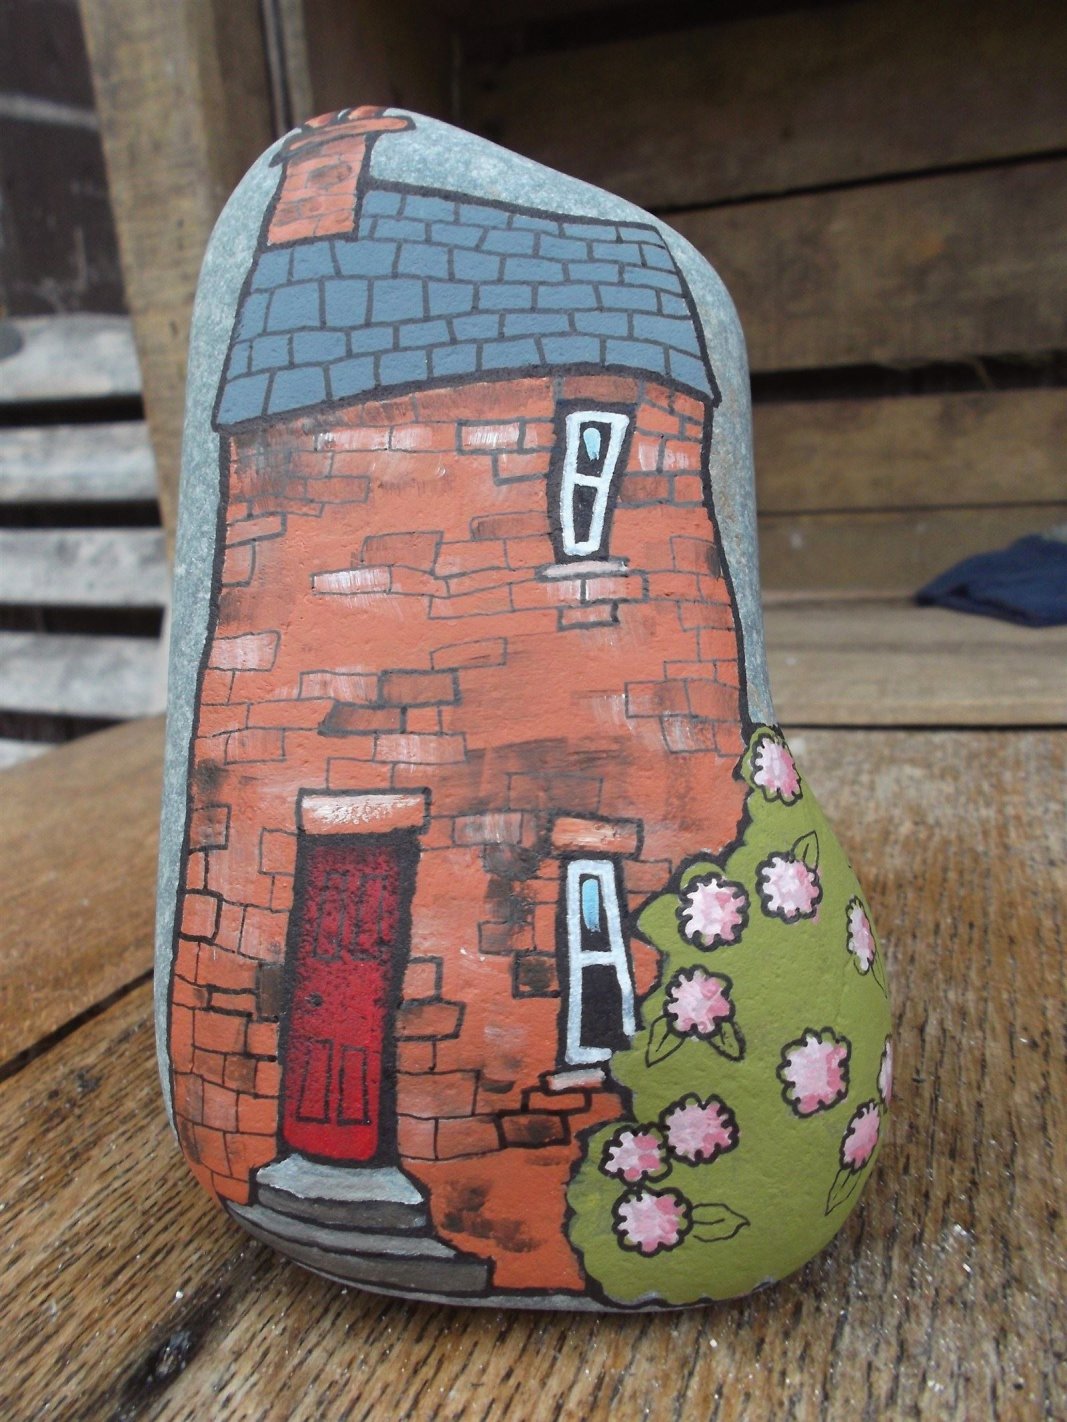 The painted pebbles are proving very popular at the moment